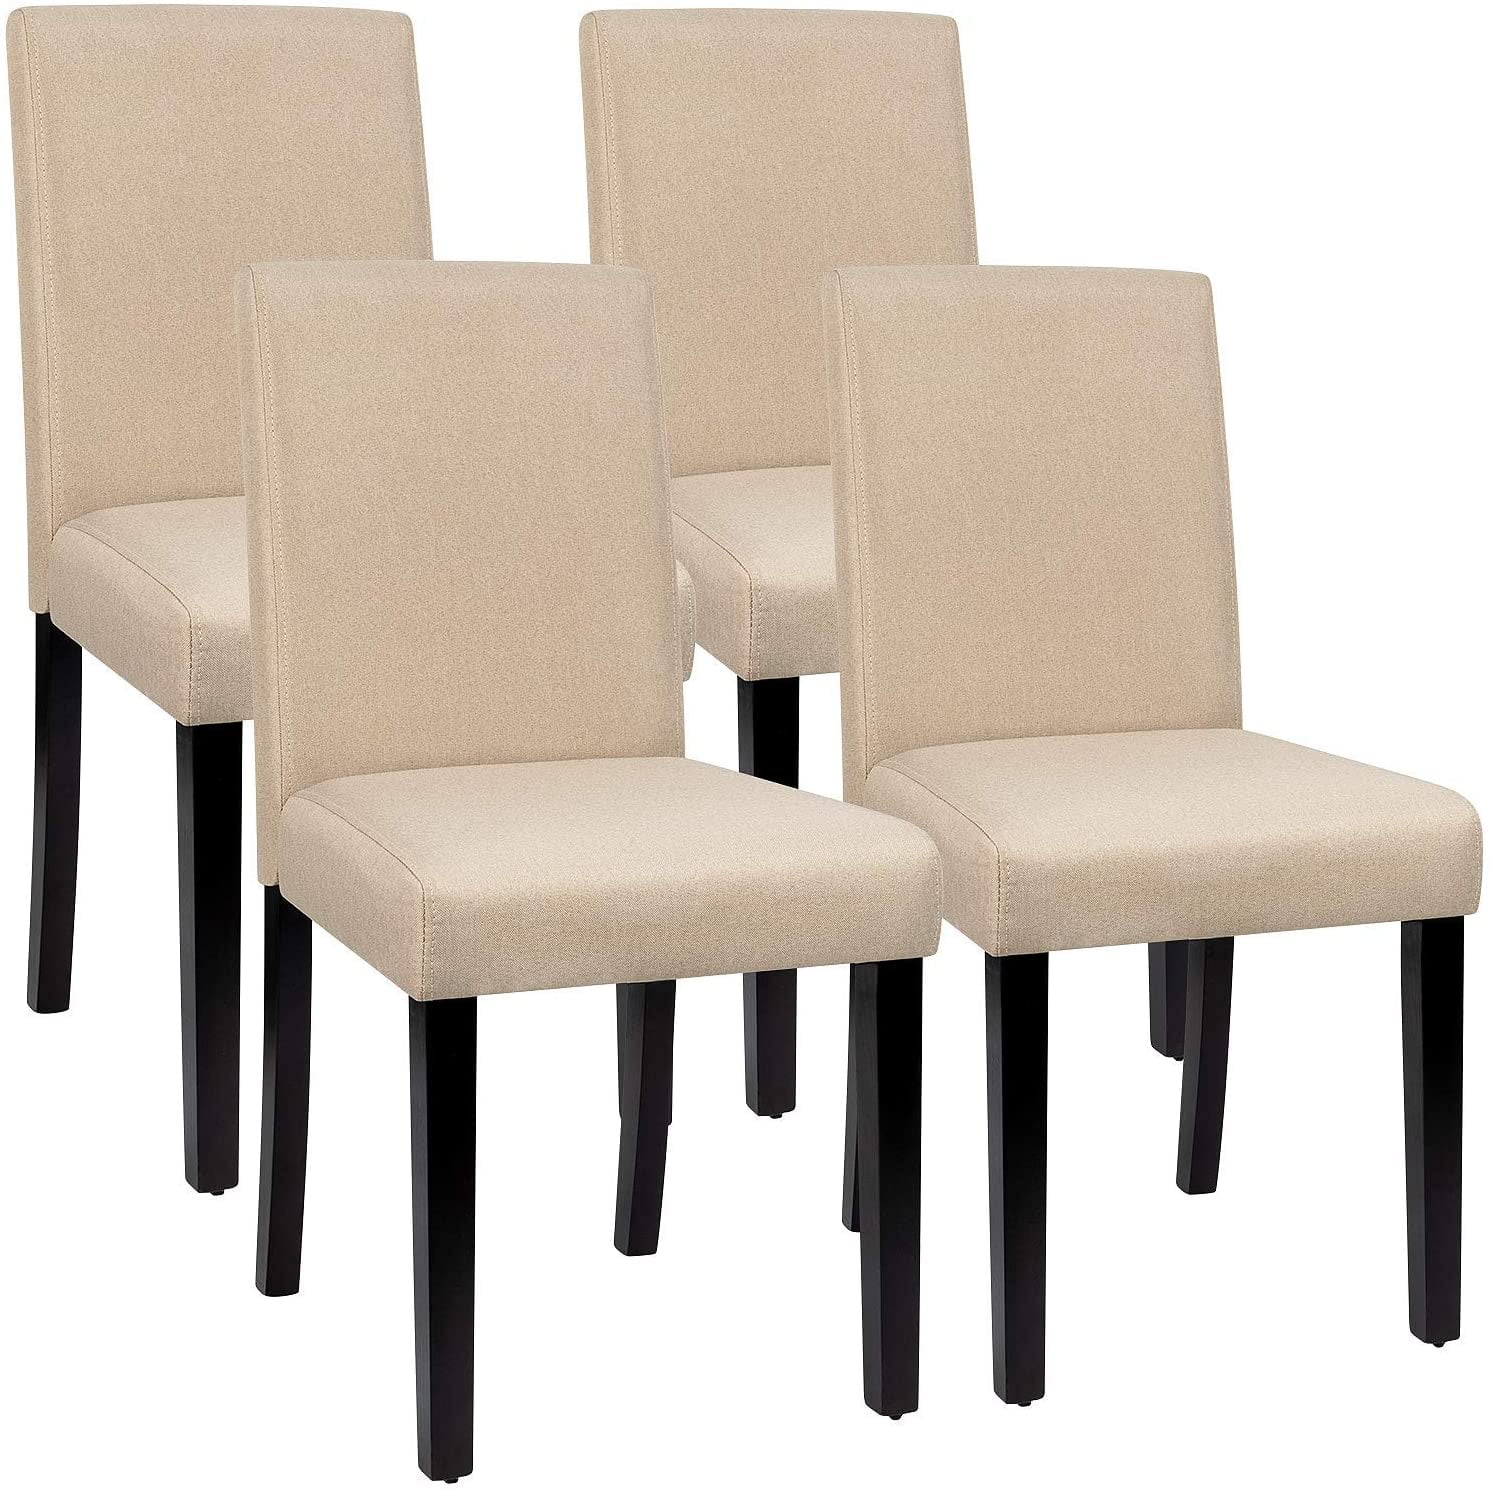 Vineego Set Of 4 Fabric Dining Chairs, Solid Wood Dining Chairs Set Of 4